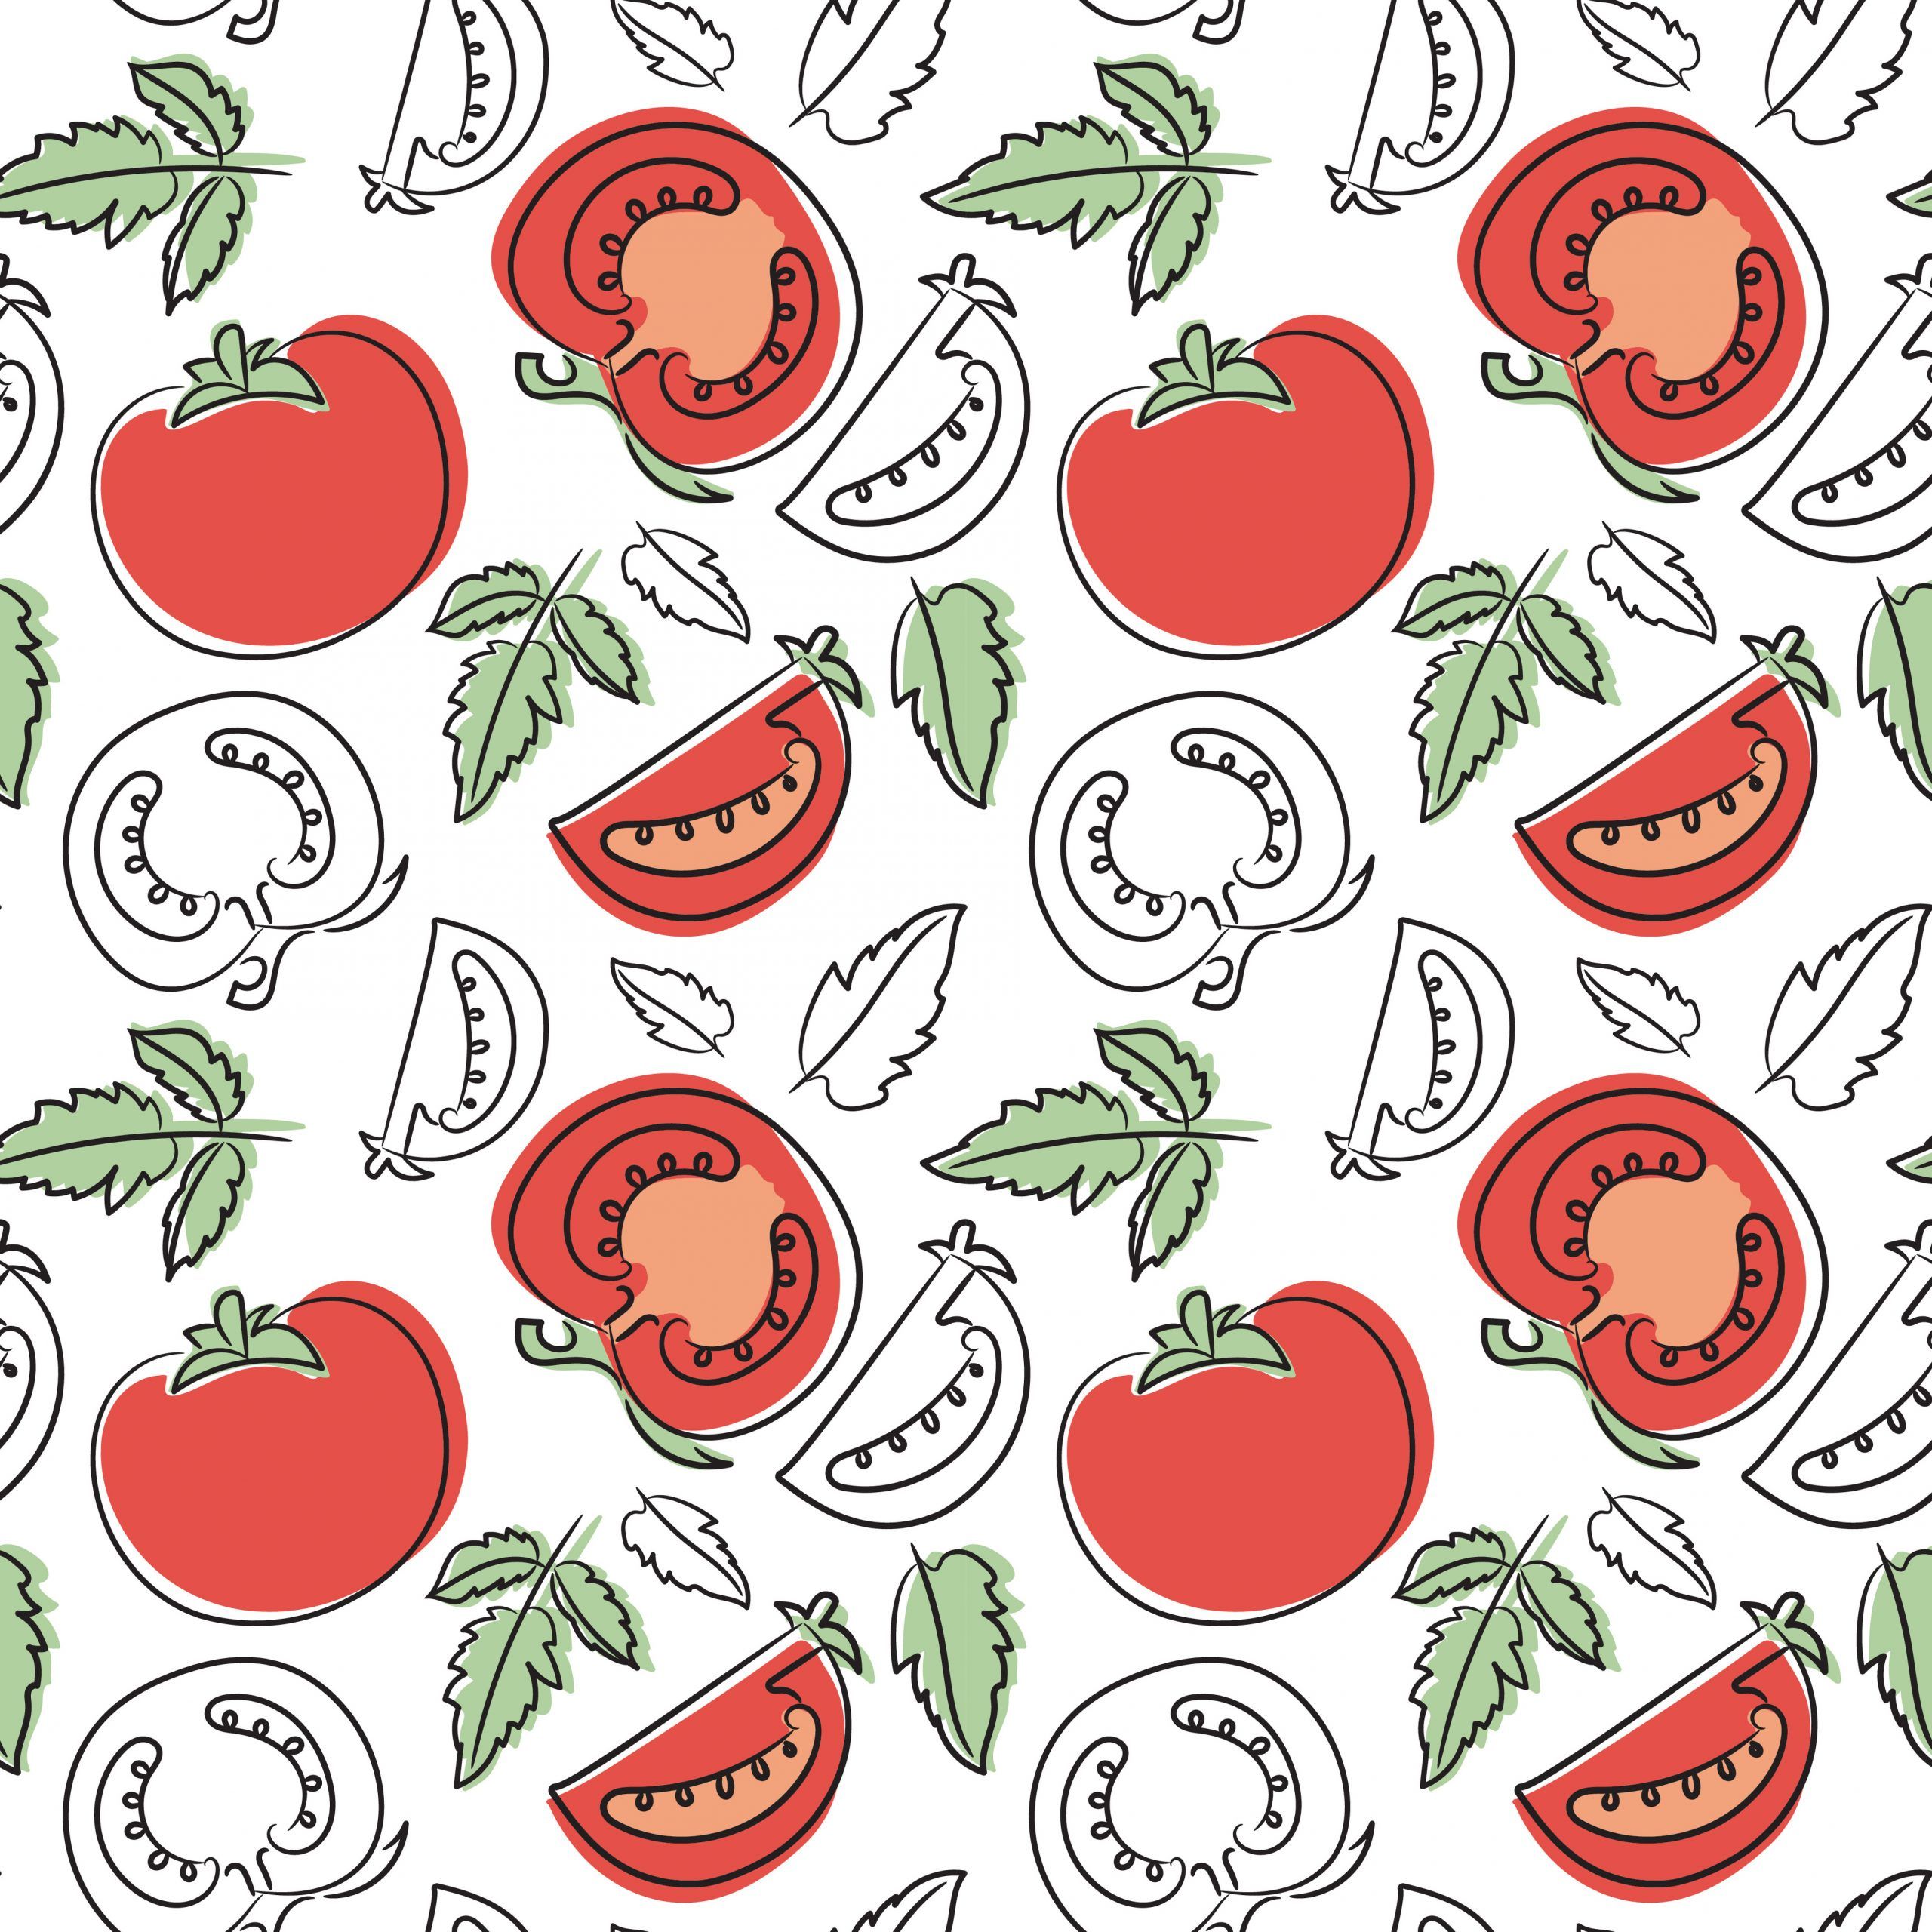 Seamless pattern with tomatoes and greens on a white background - Hand drawn